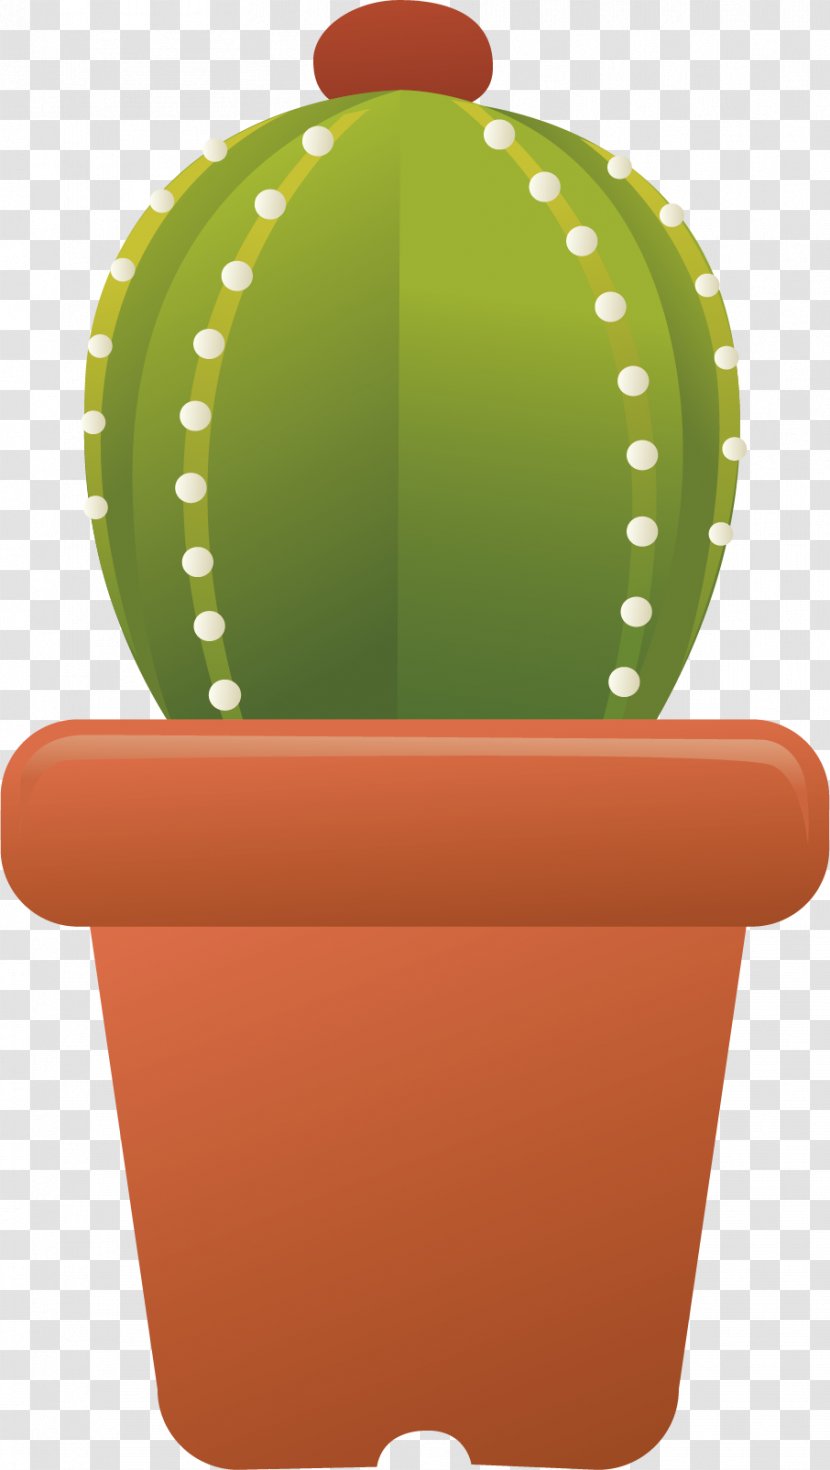 Icon - Cactaceae - Prickly Pear Vector Material Transparent PNG